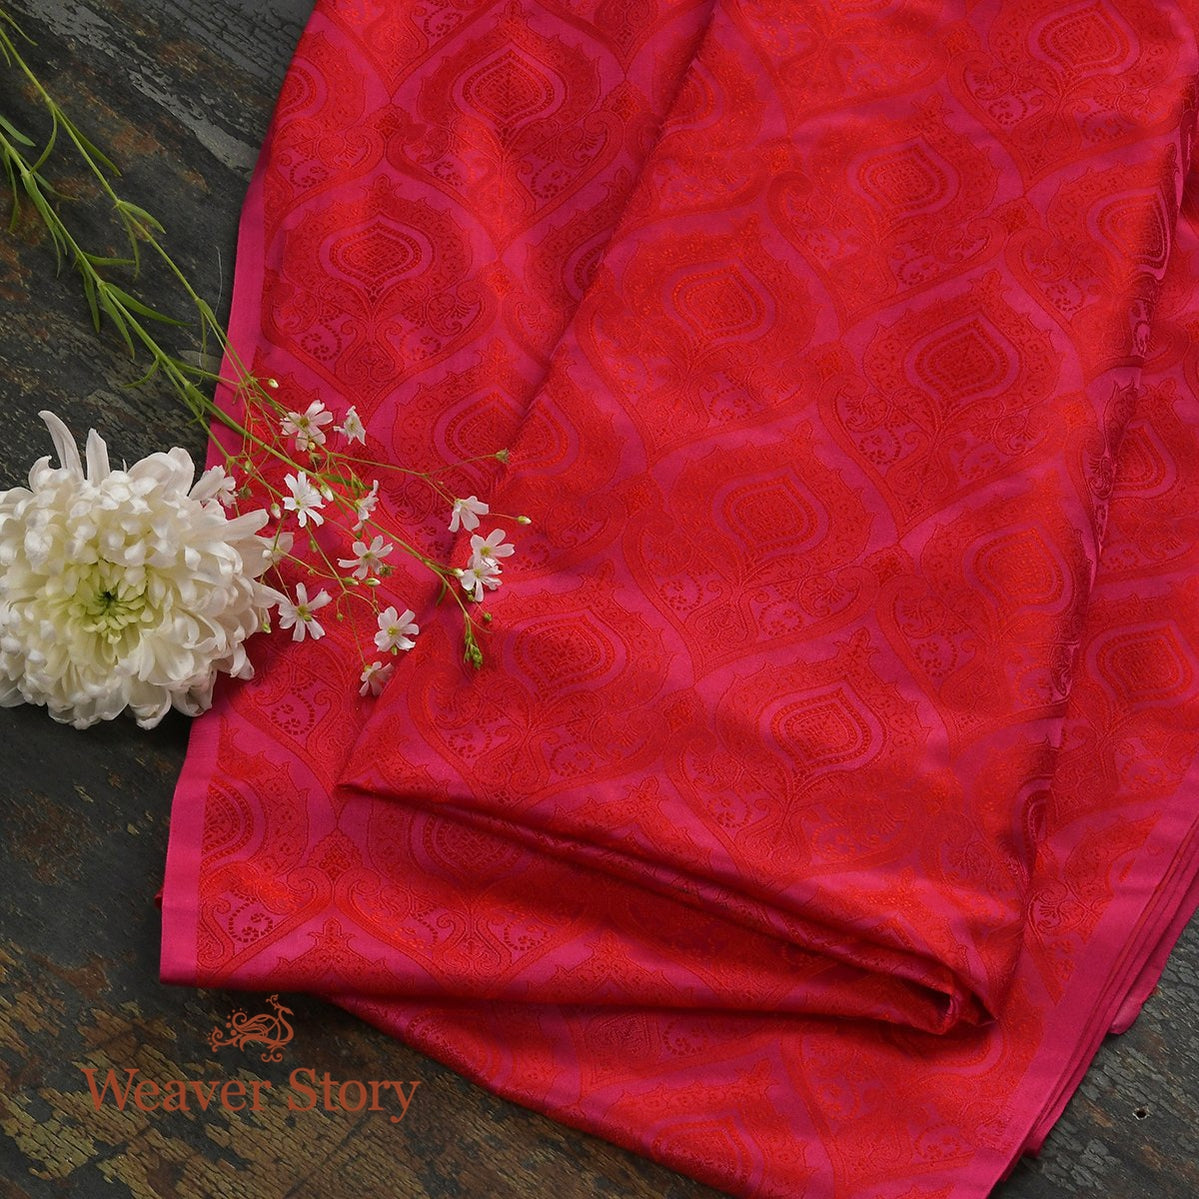 Handloom_Rani_Pink_Tanchoi_Fabric_with_Floral_Weave_WeaverStory_01